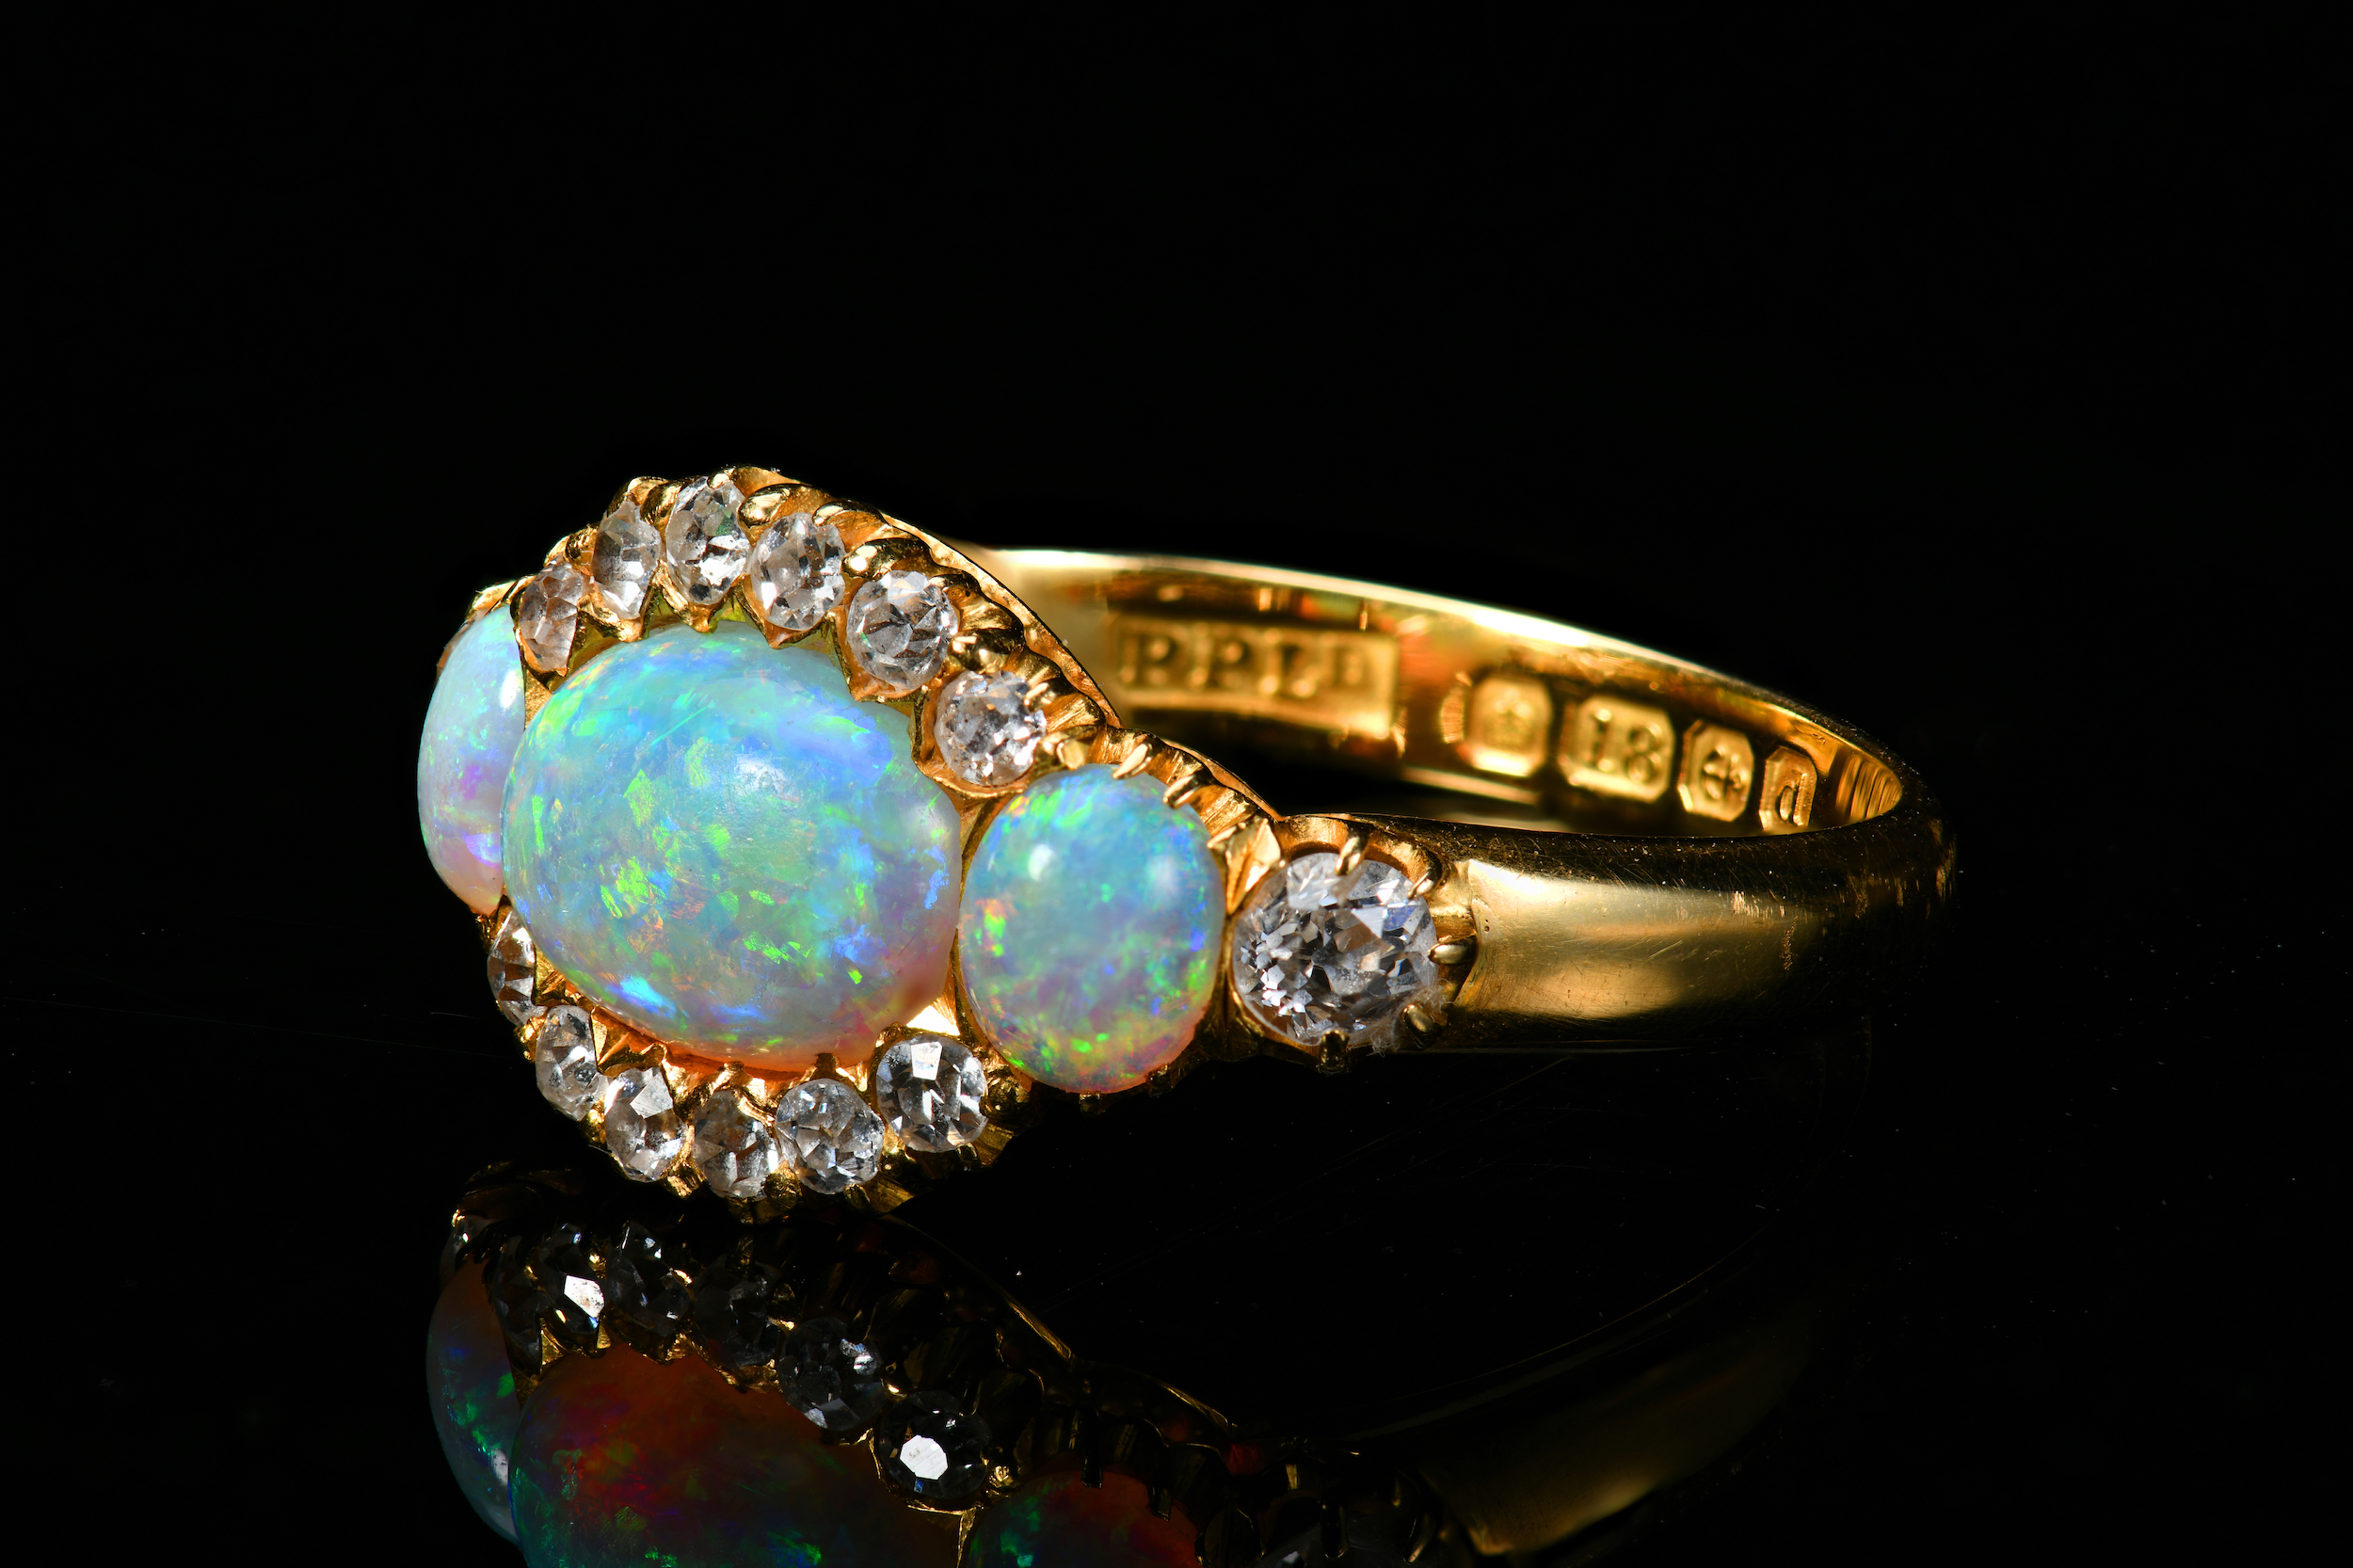 An 18Ct Gold Ring Set With Three Opals And Old Cut Diamonds. Sold For £1,100